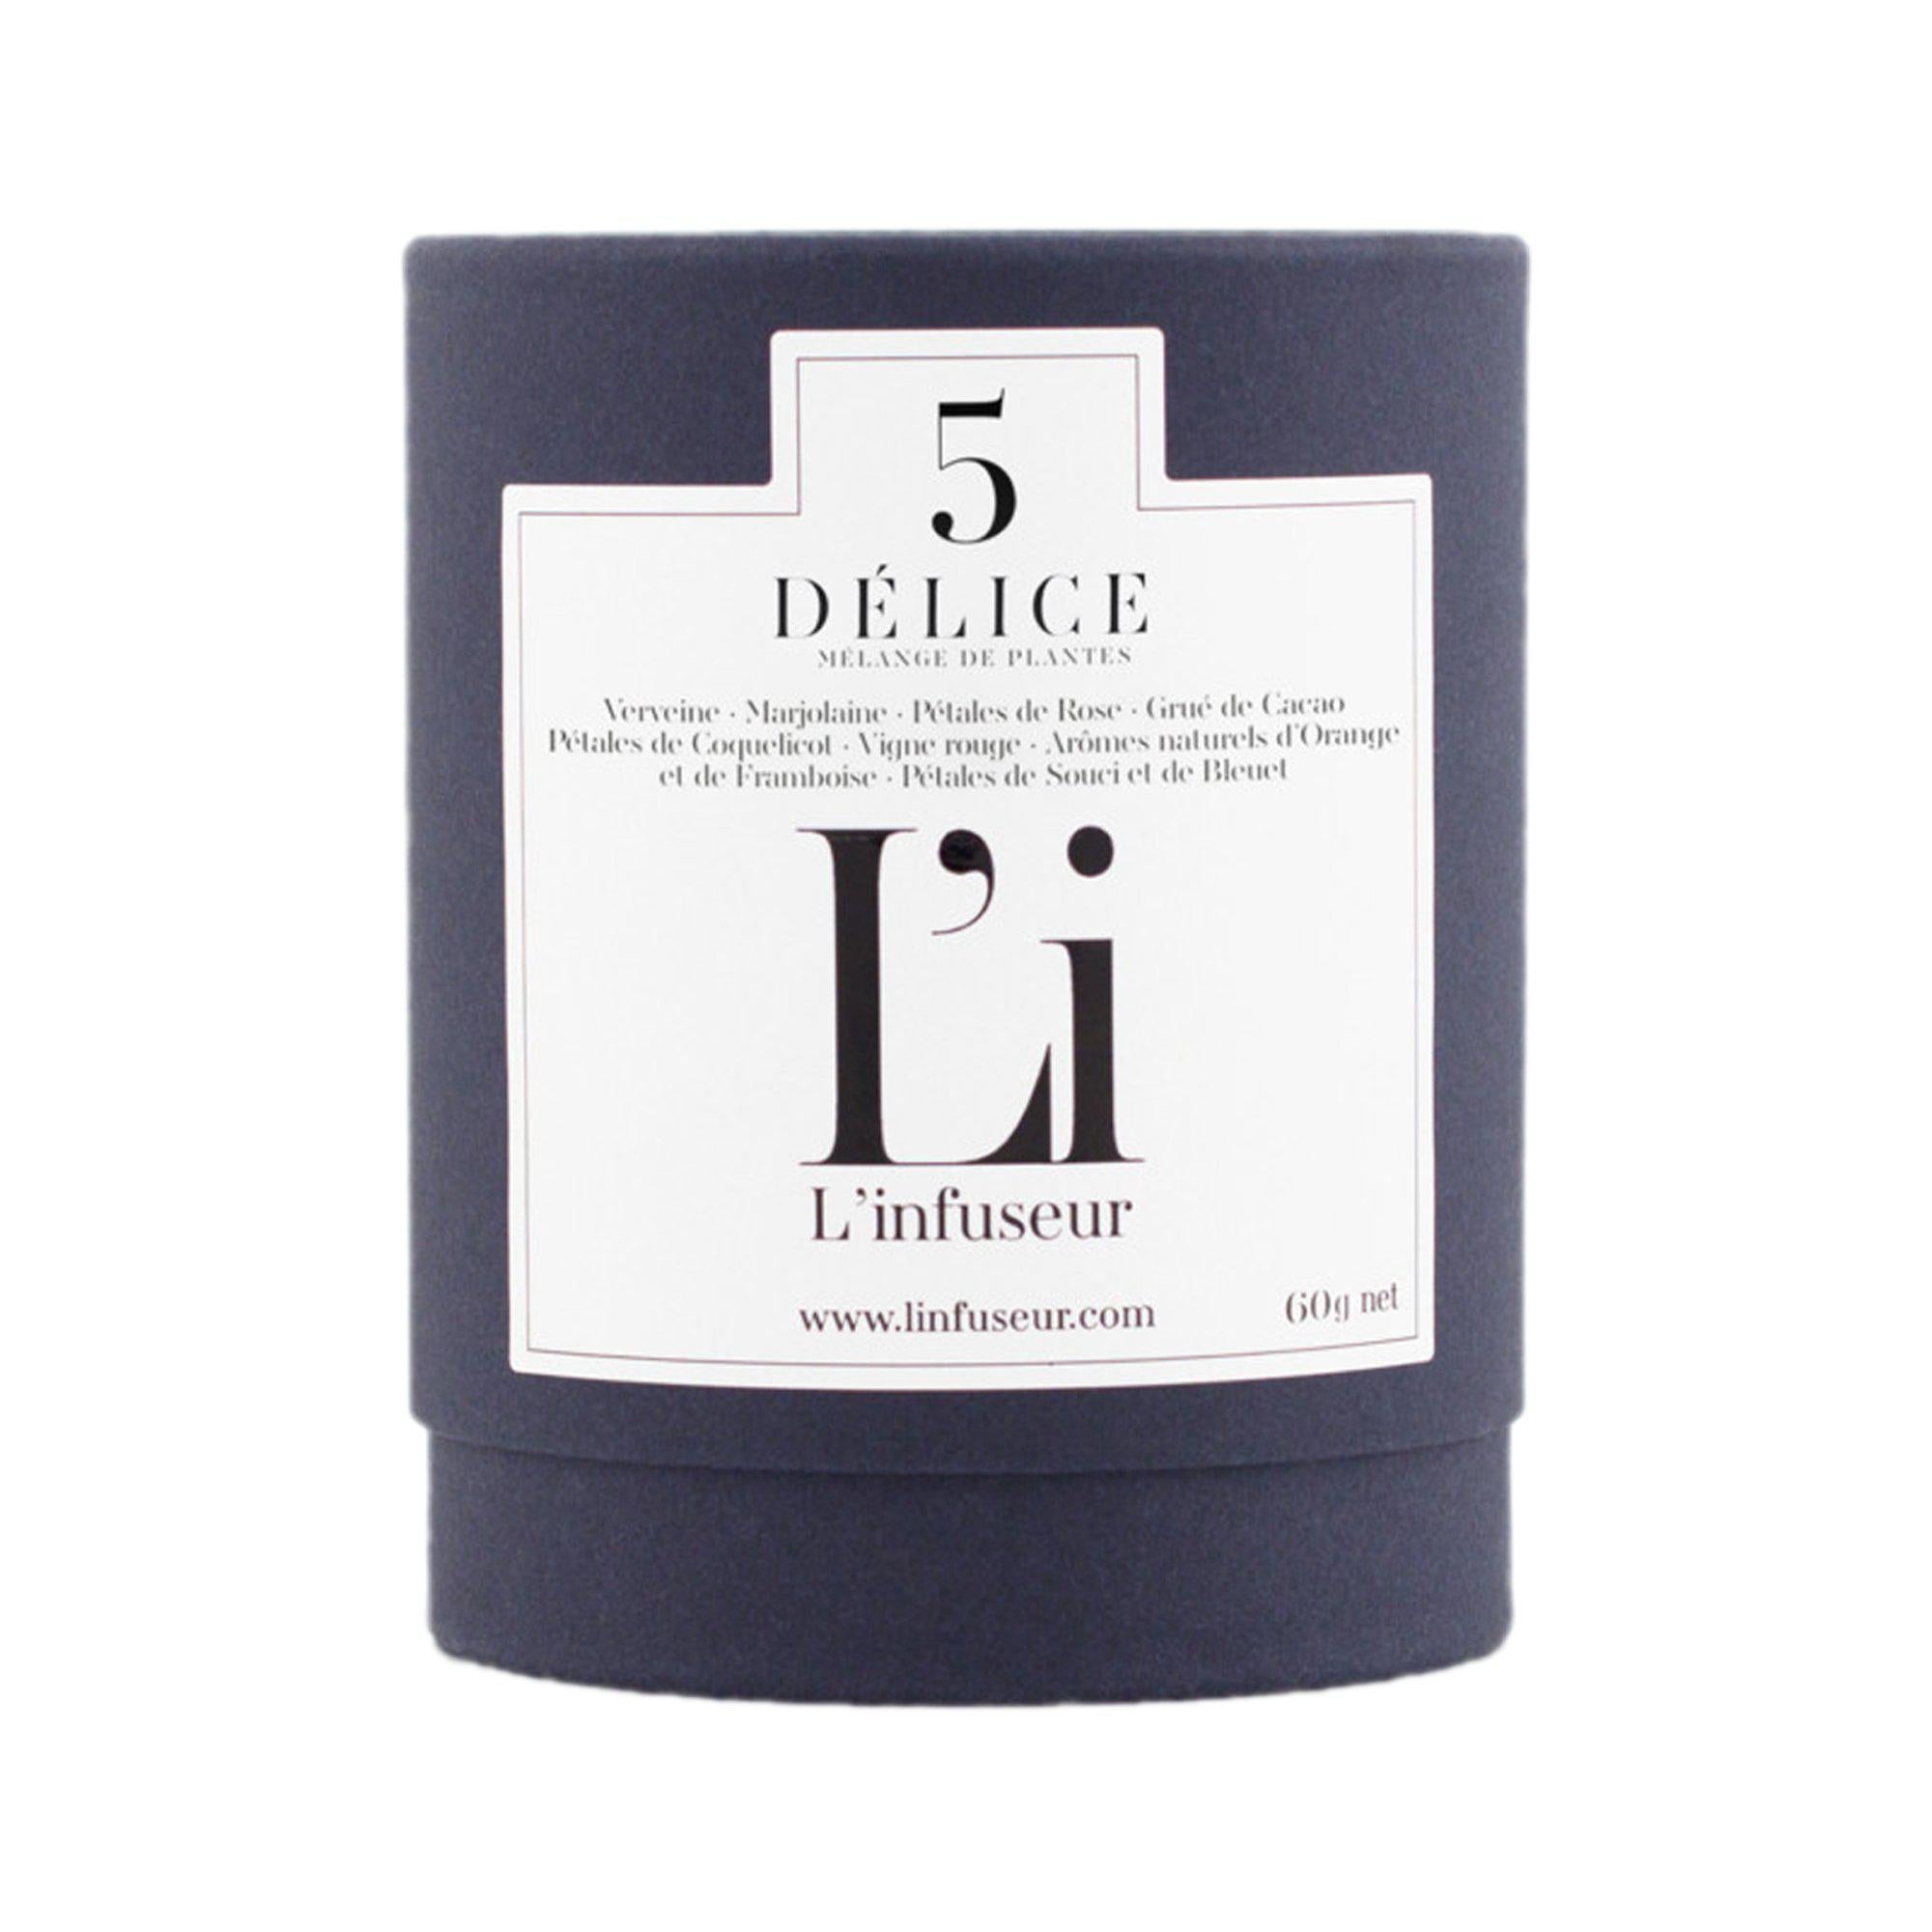 L'infusion n°5 - Délice Infusion n°5 - Delight - L'infuseur